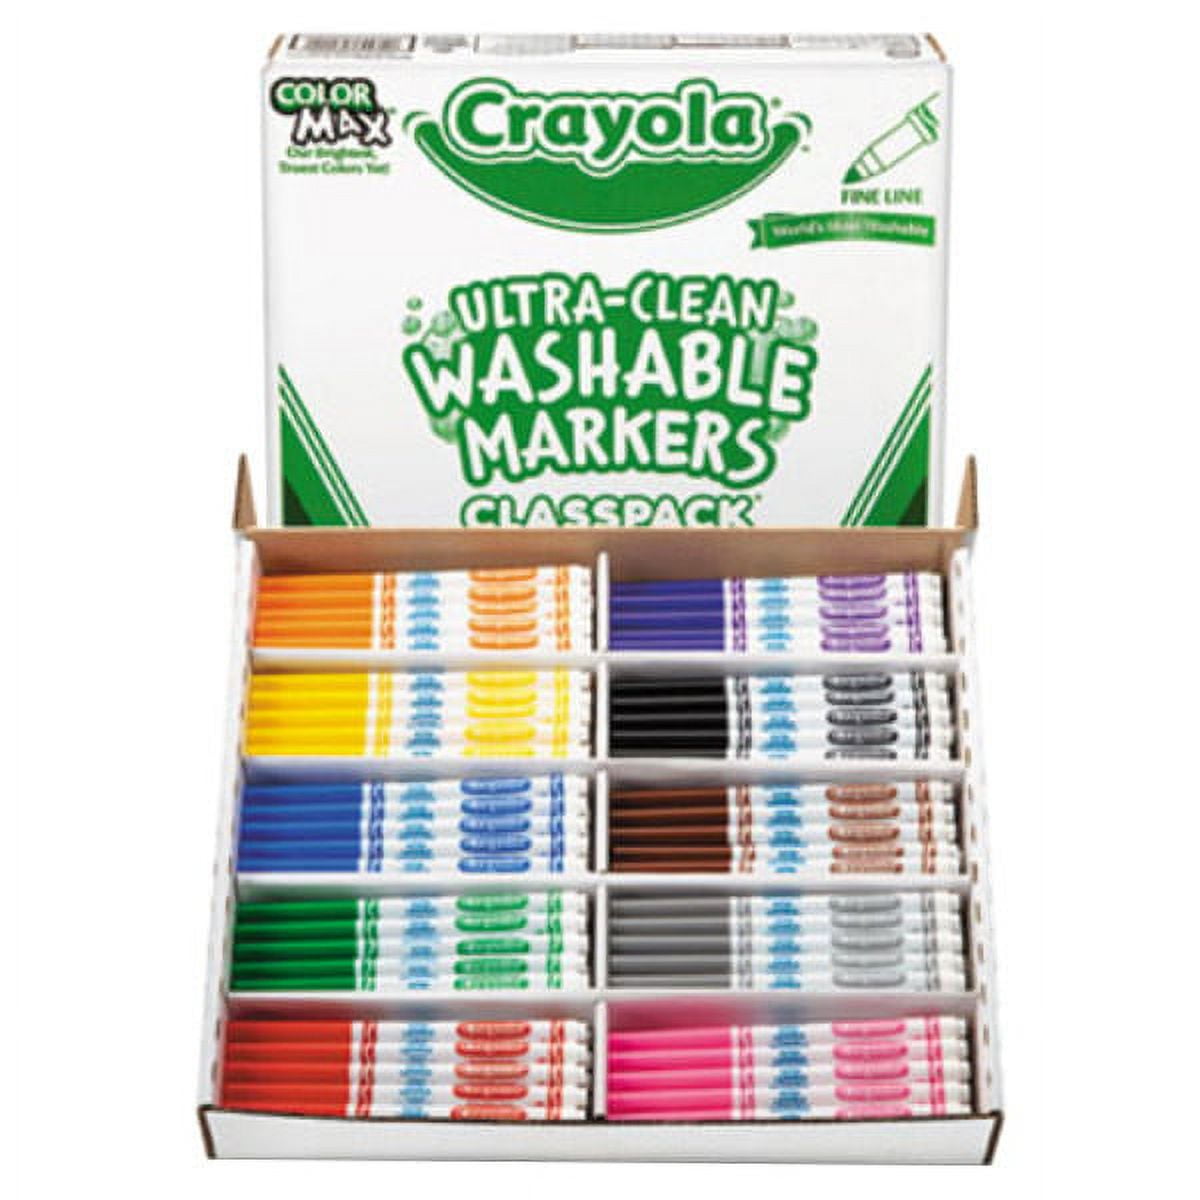  Glass Pen Window Marker: Liquid Chalk Markers for Glass, Car  Marker or Mirror Pen with Washable Paint - Car Windows, Storefront Window,  Wedding, Parade, Party & Holiday Decorations (White, Fine Tip) 